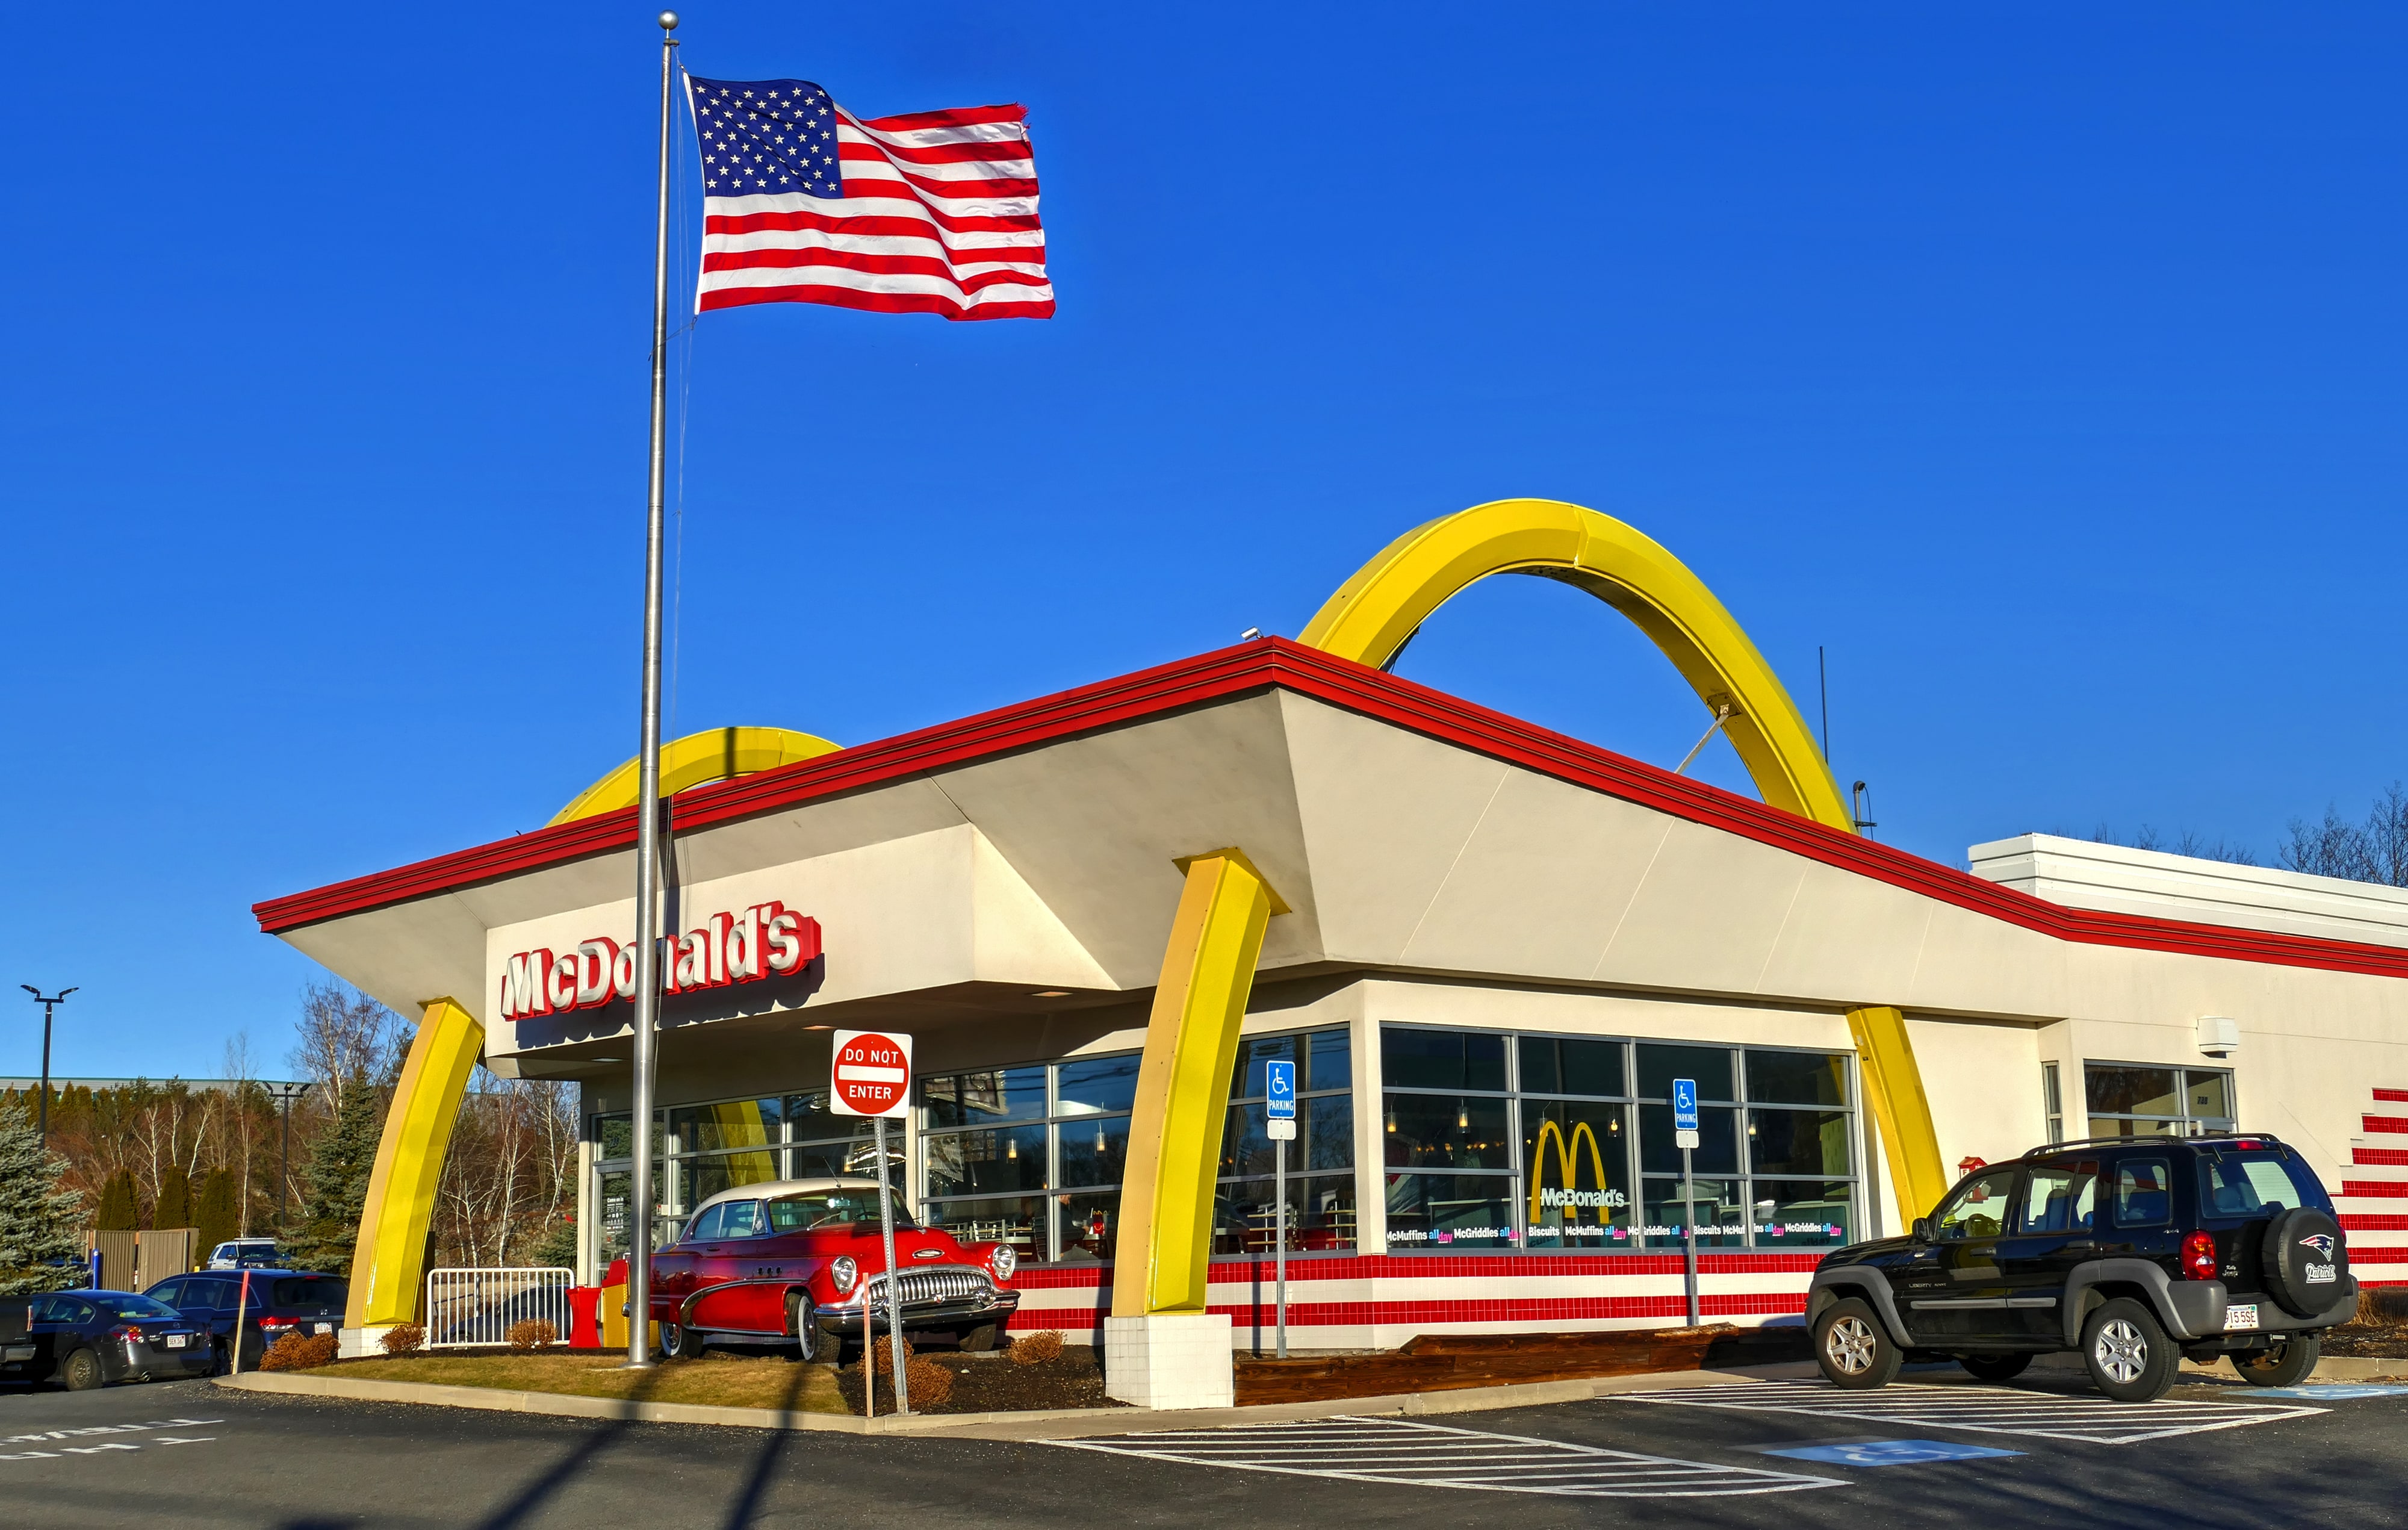 Mcdonald S Continues To Invest In Tech For The Future Foodservice Consultants Society International